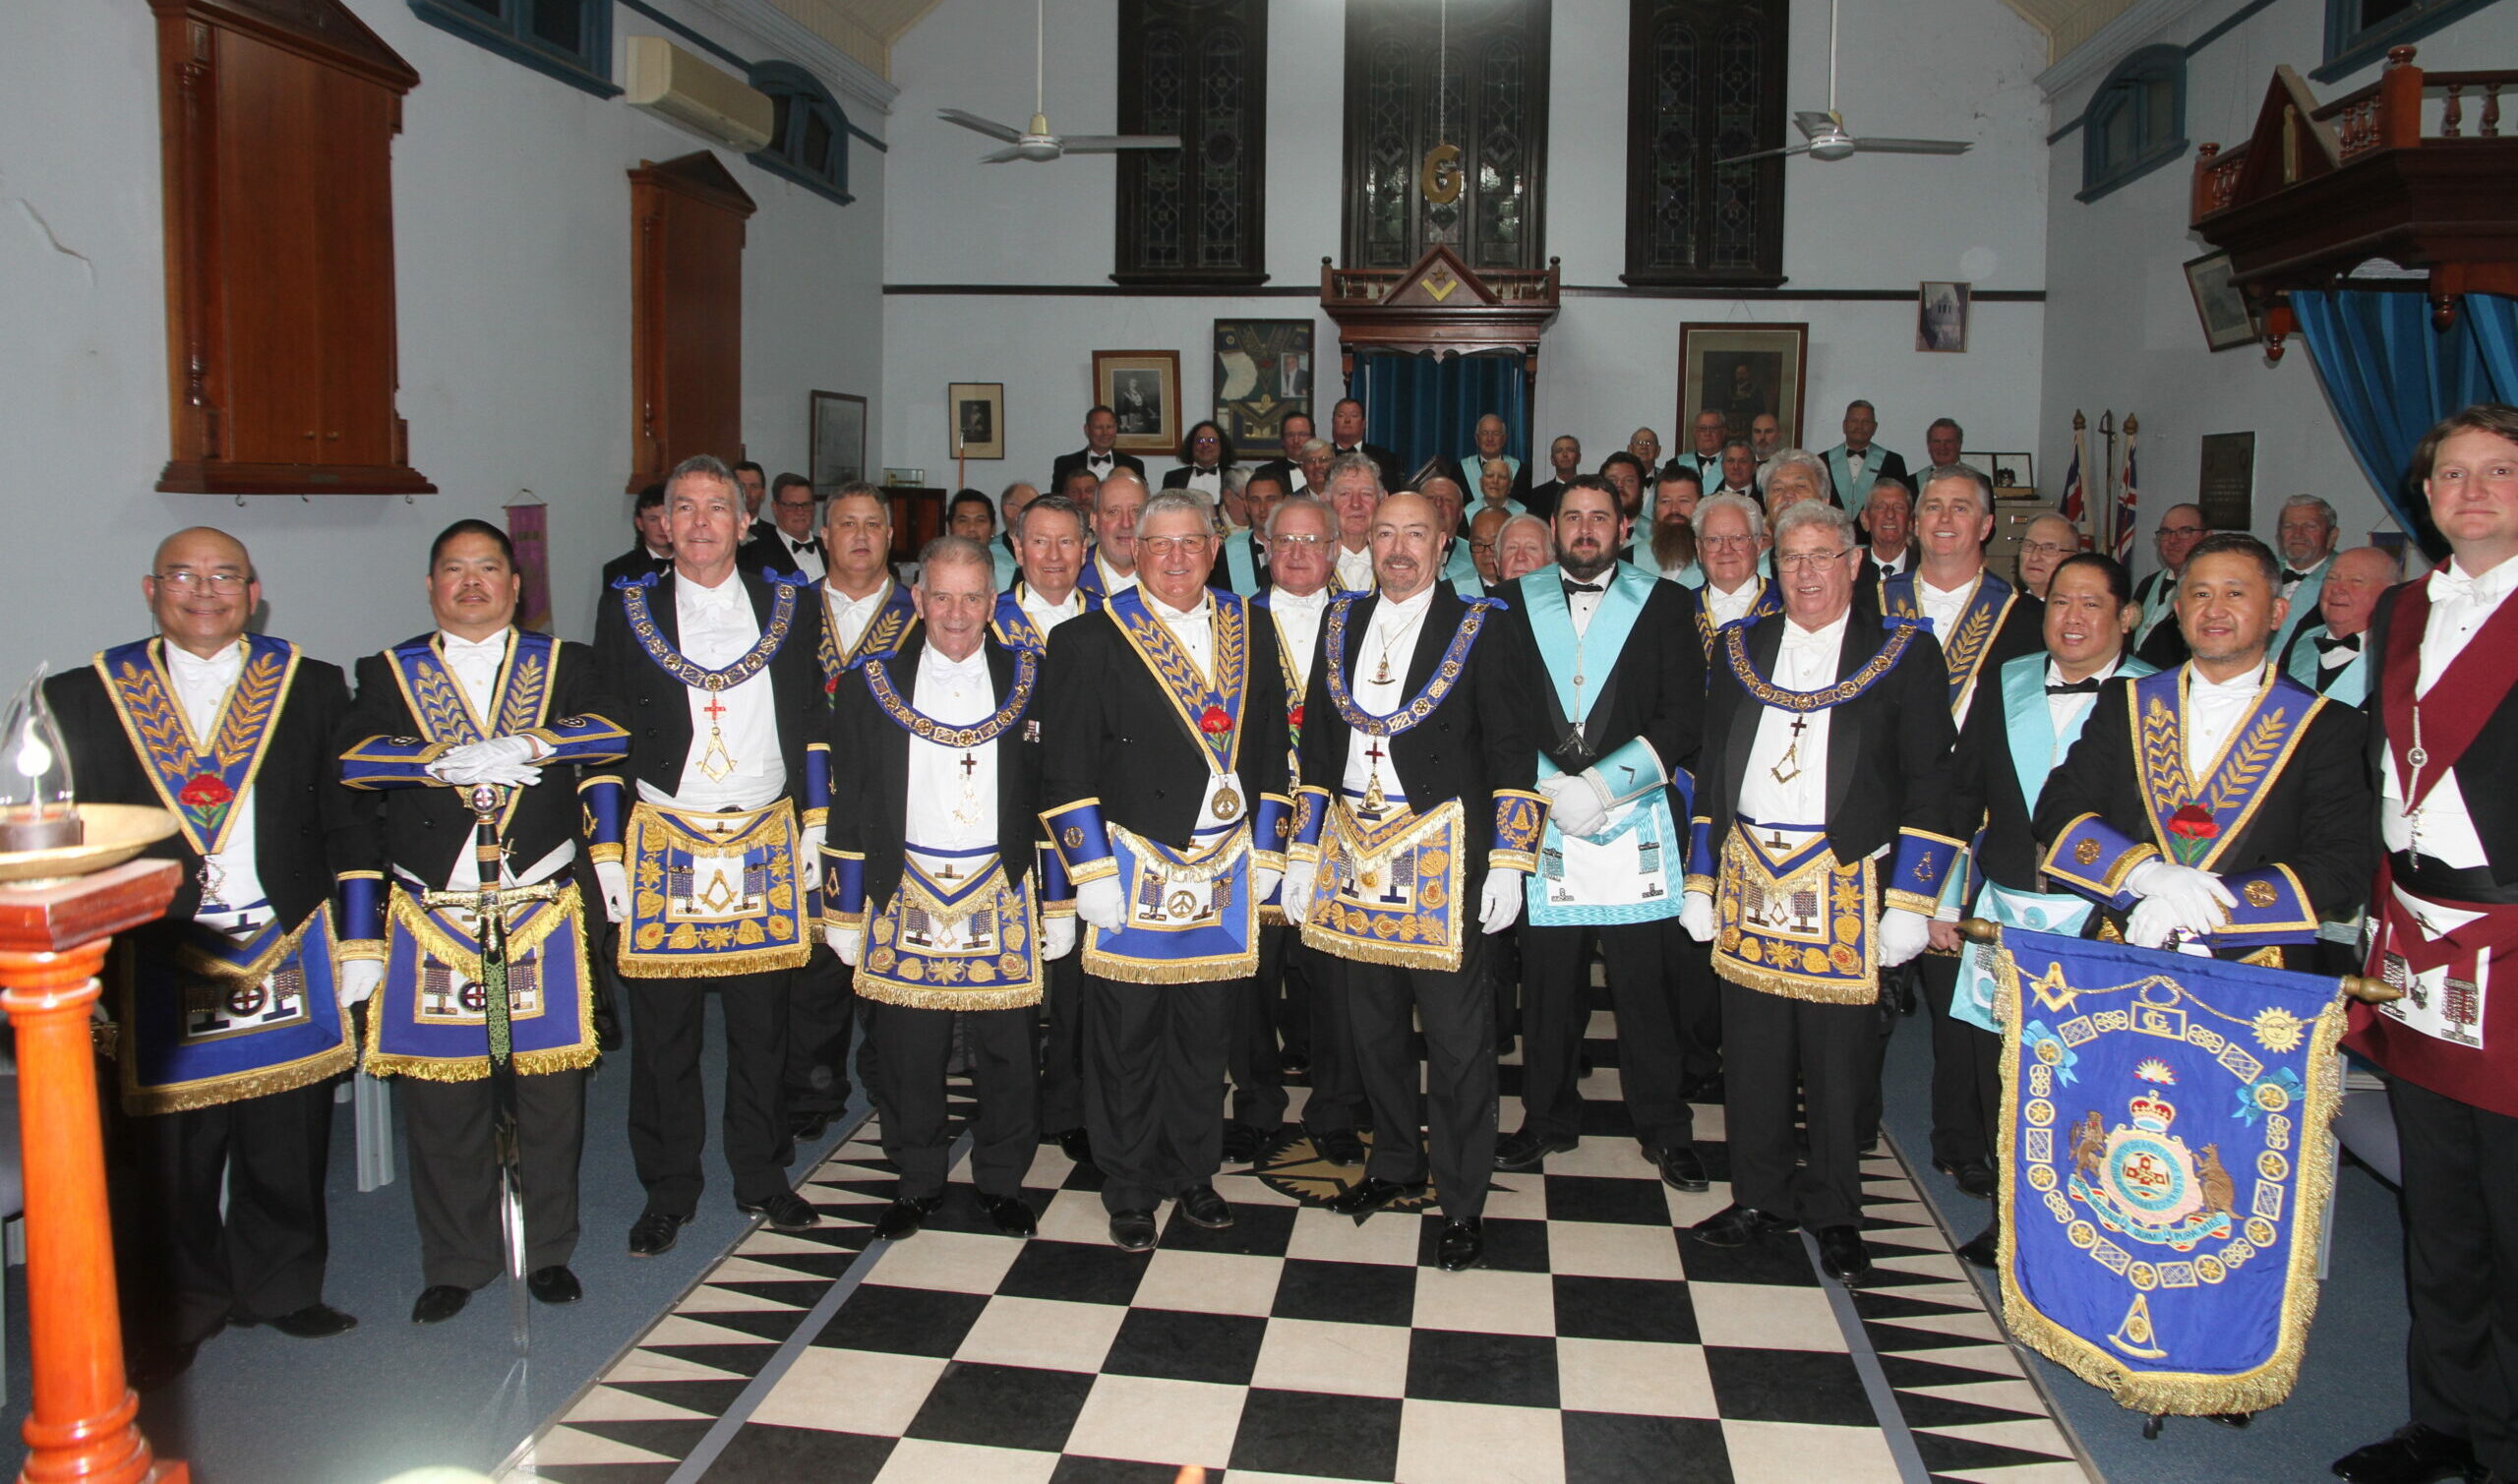 130 years of Masonic traditions continue